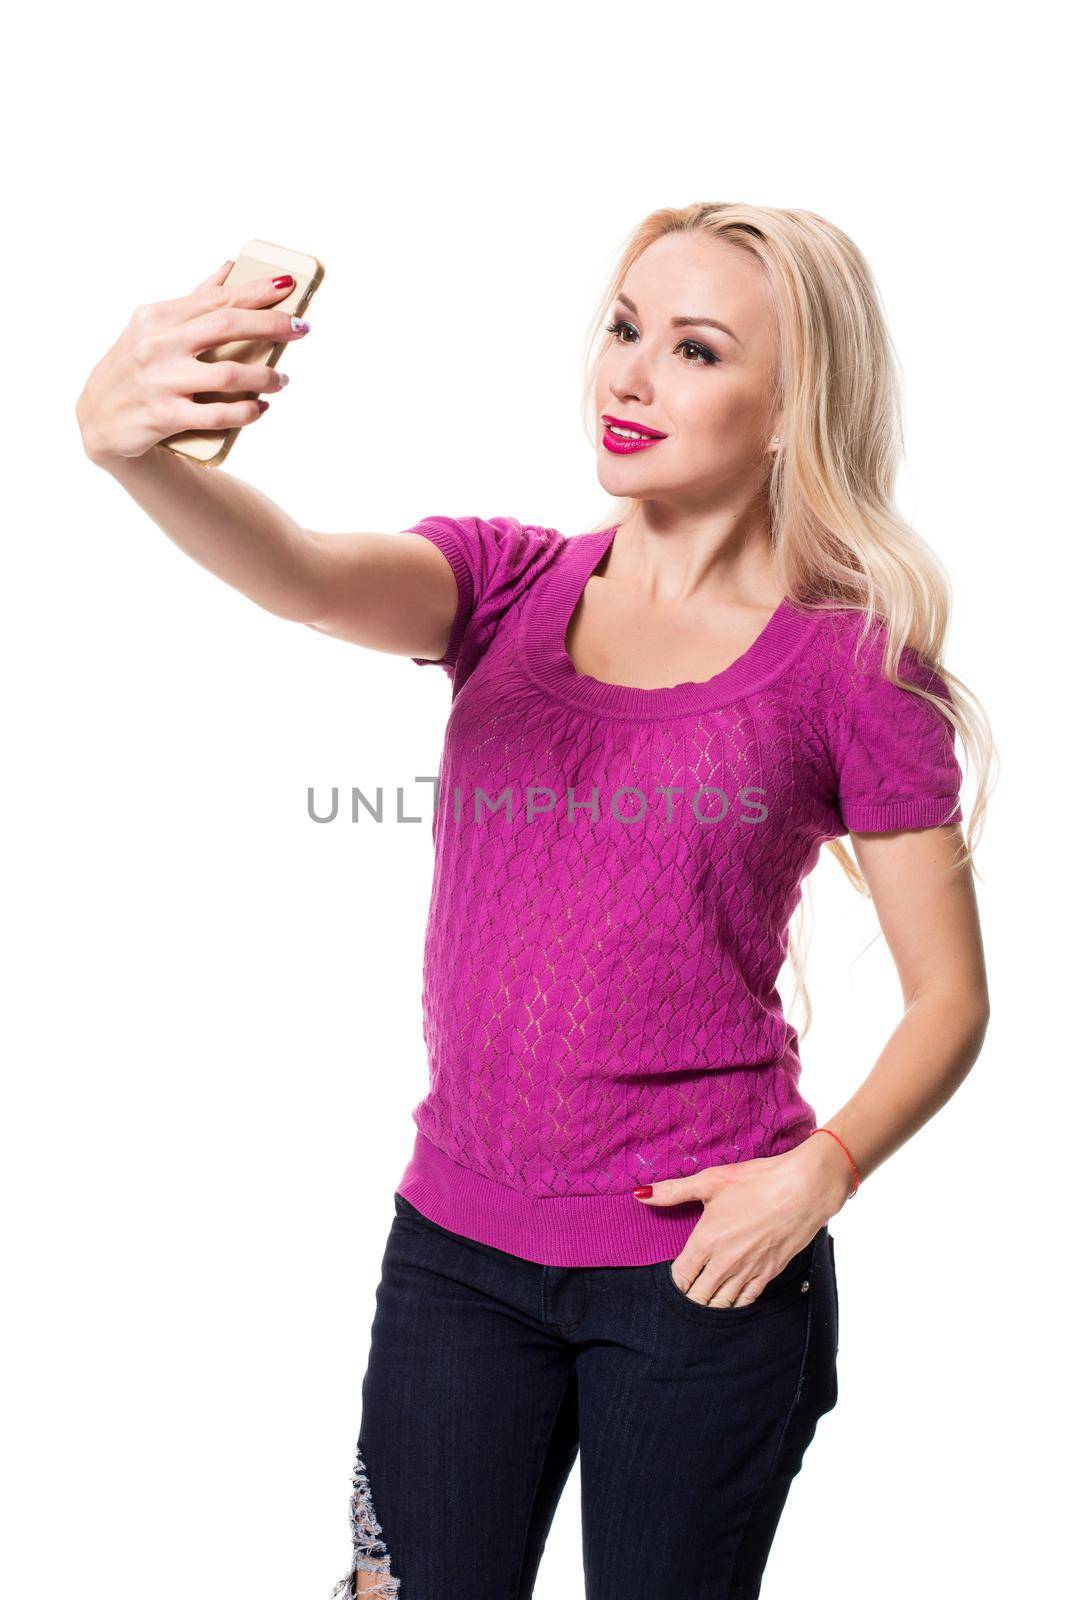 Young blonde doing selfie on isolated white background. Selfie time. Young woman in a lilac blouse